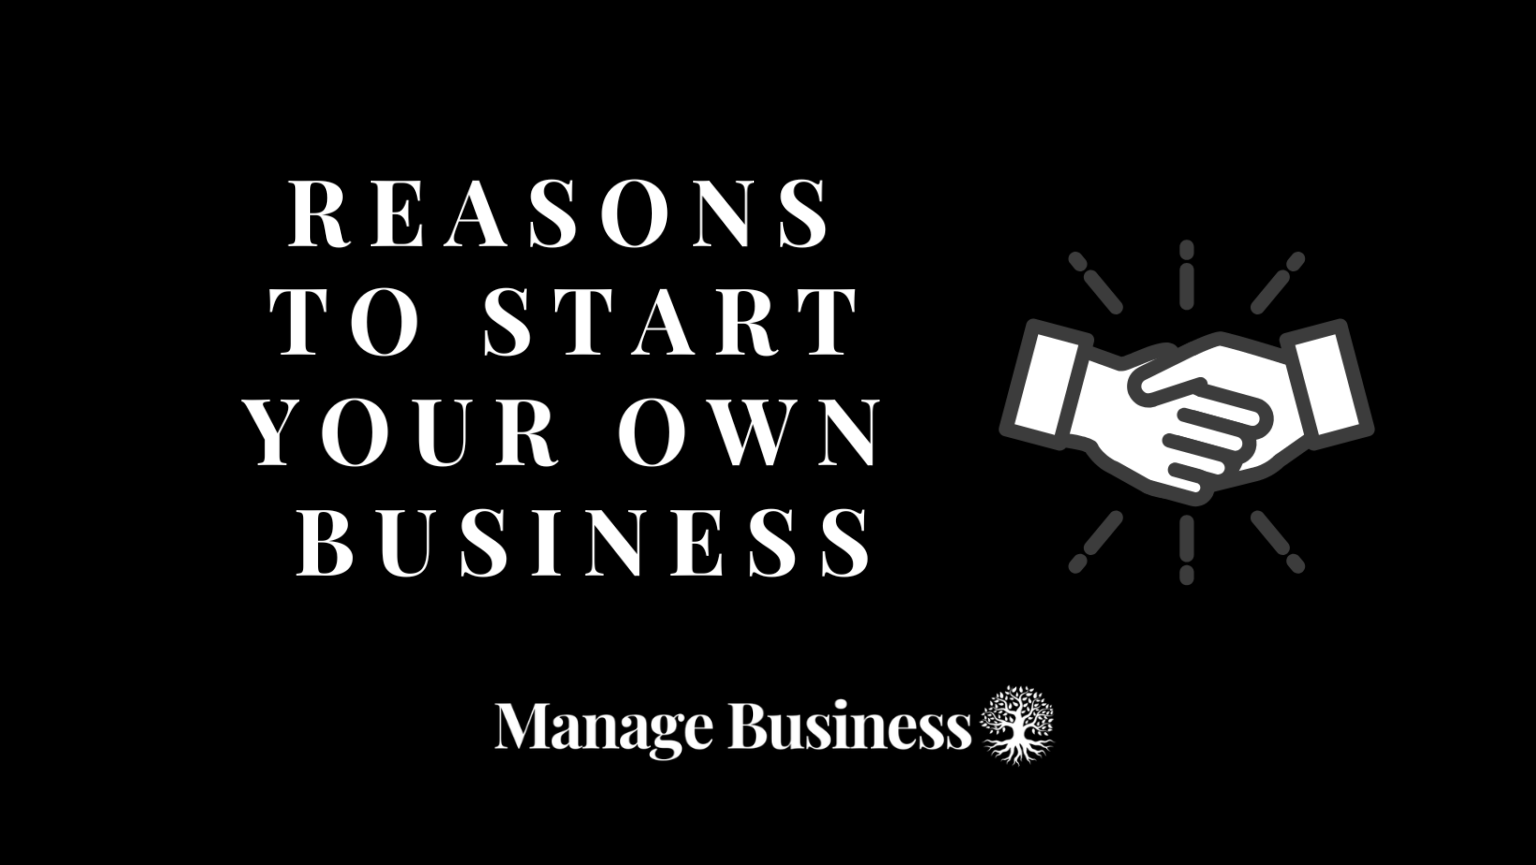 Reasons to start your own business